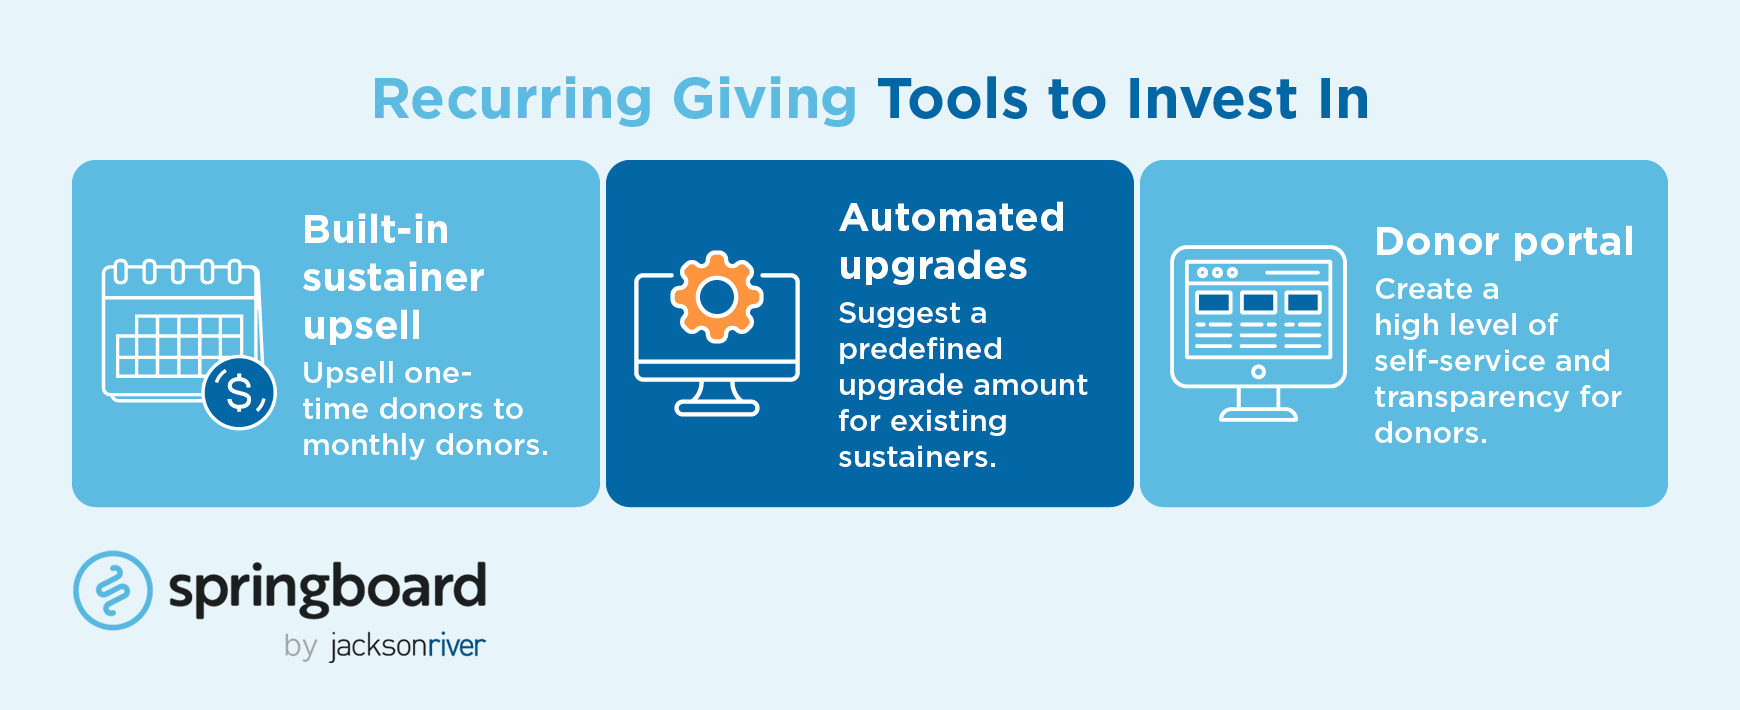 Look for a Salesforce peer-to-peer platform with these recurring giving tools, repeated below.